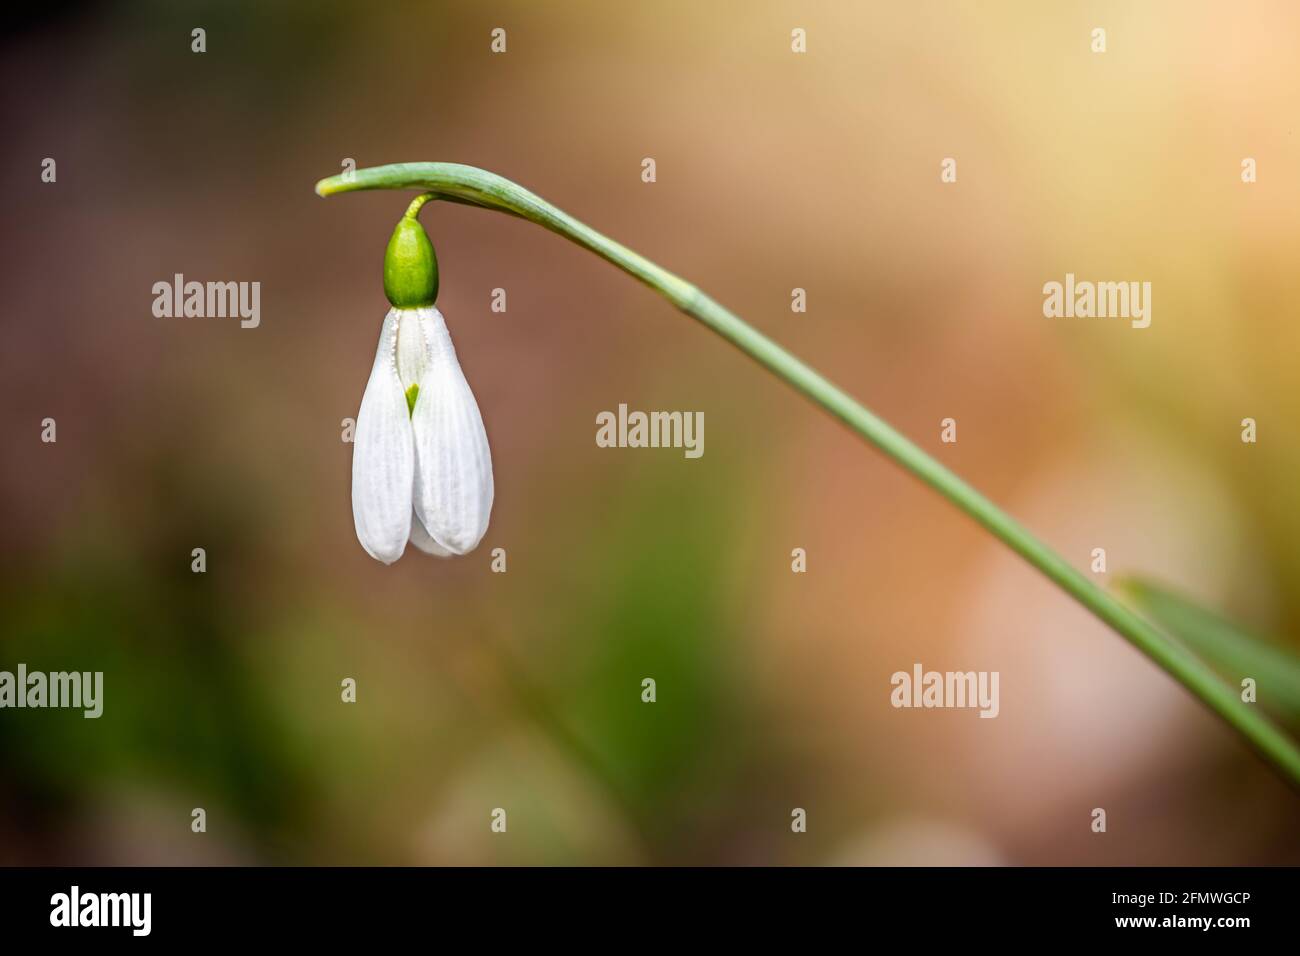 Snowdrop or common snowdrop (Galanthus nivalis) flower in the forest with warm sunshine at springtime. The first flowers of the Spring season are bloo Stock Photo